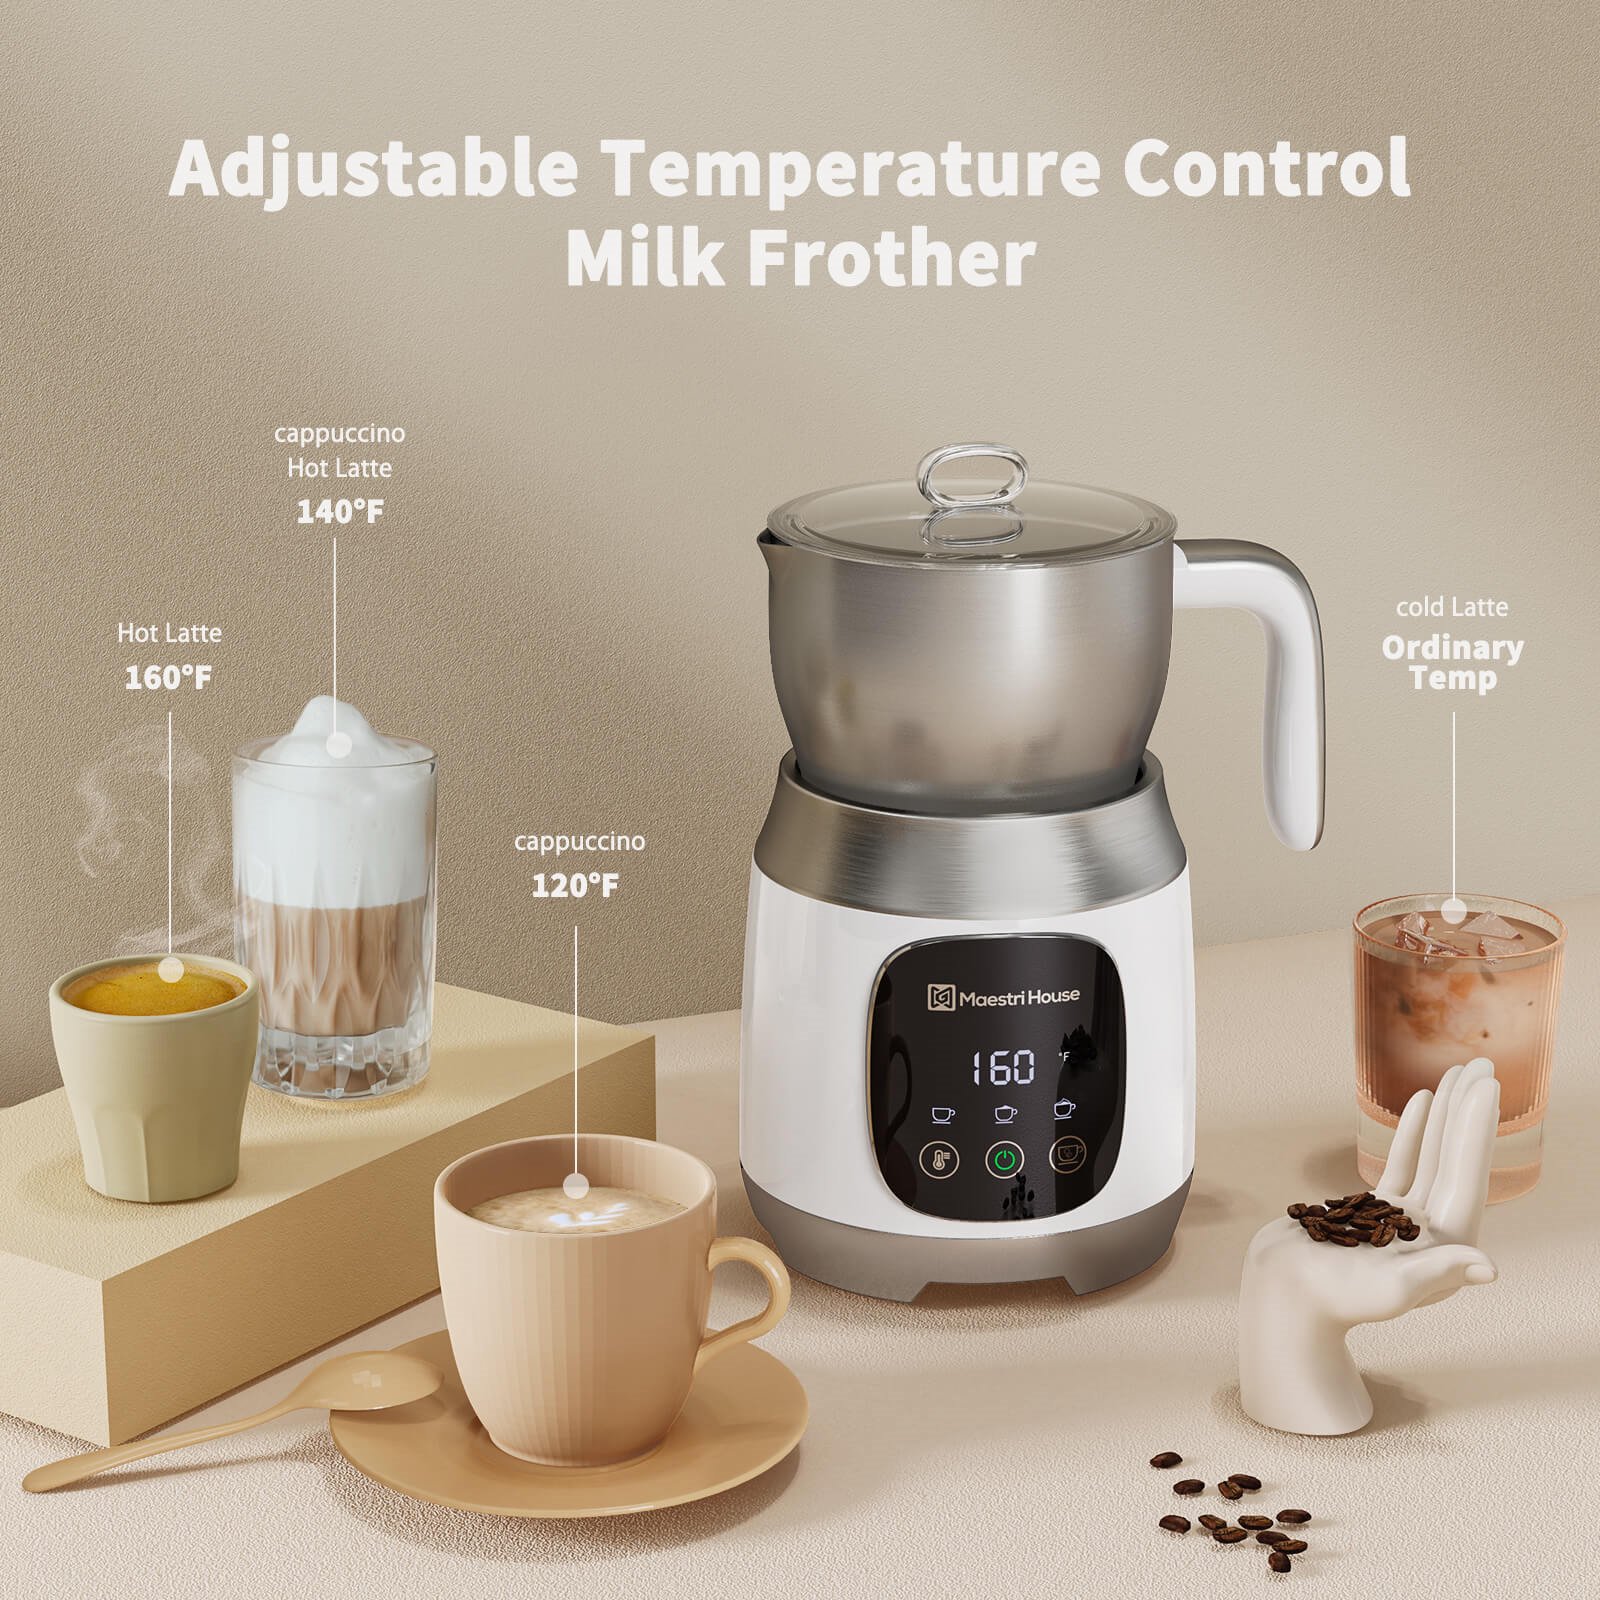 Electric Milk Frother Steamer for Dairy/Plant-Based, Hot Chocolate,  Cappuccinos, Lattes, Includes Hot, Cold and Frothy Functions